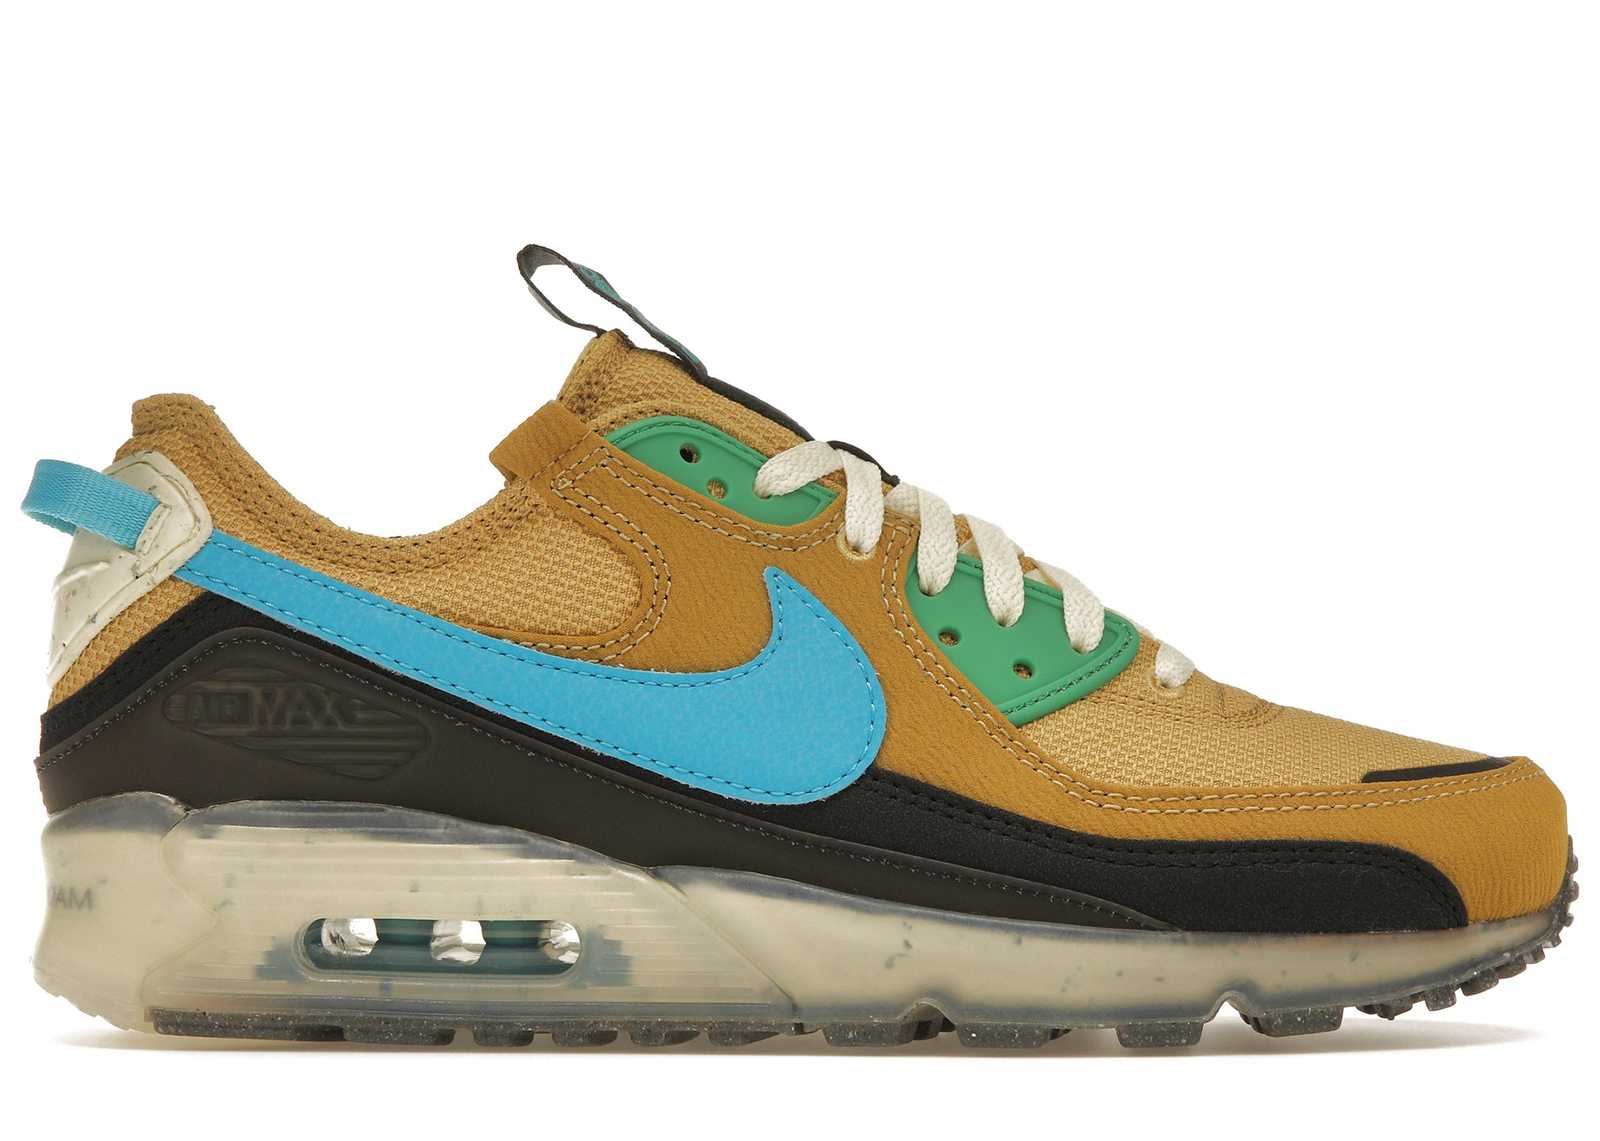 Buy Nike Air Max  Size  Shoes & New Sneakers   StockX